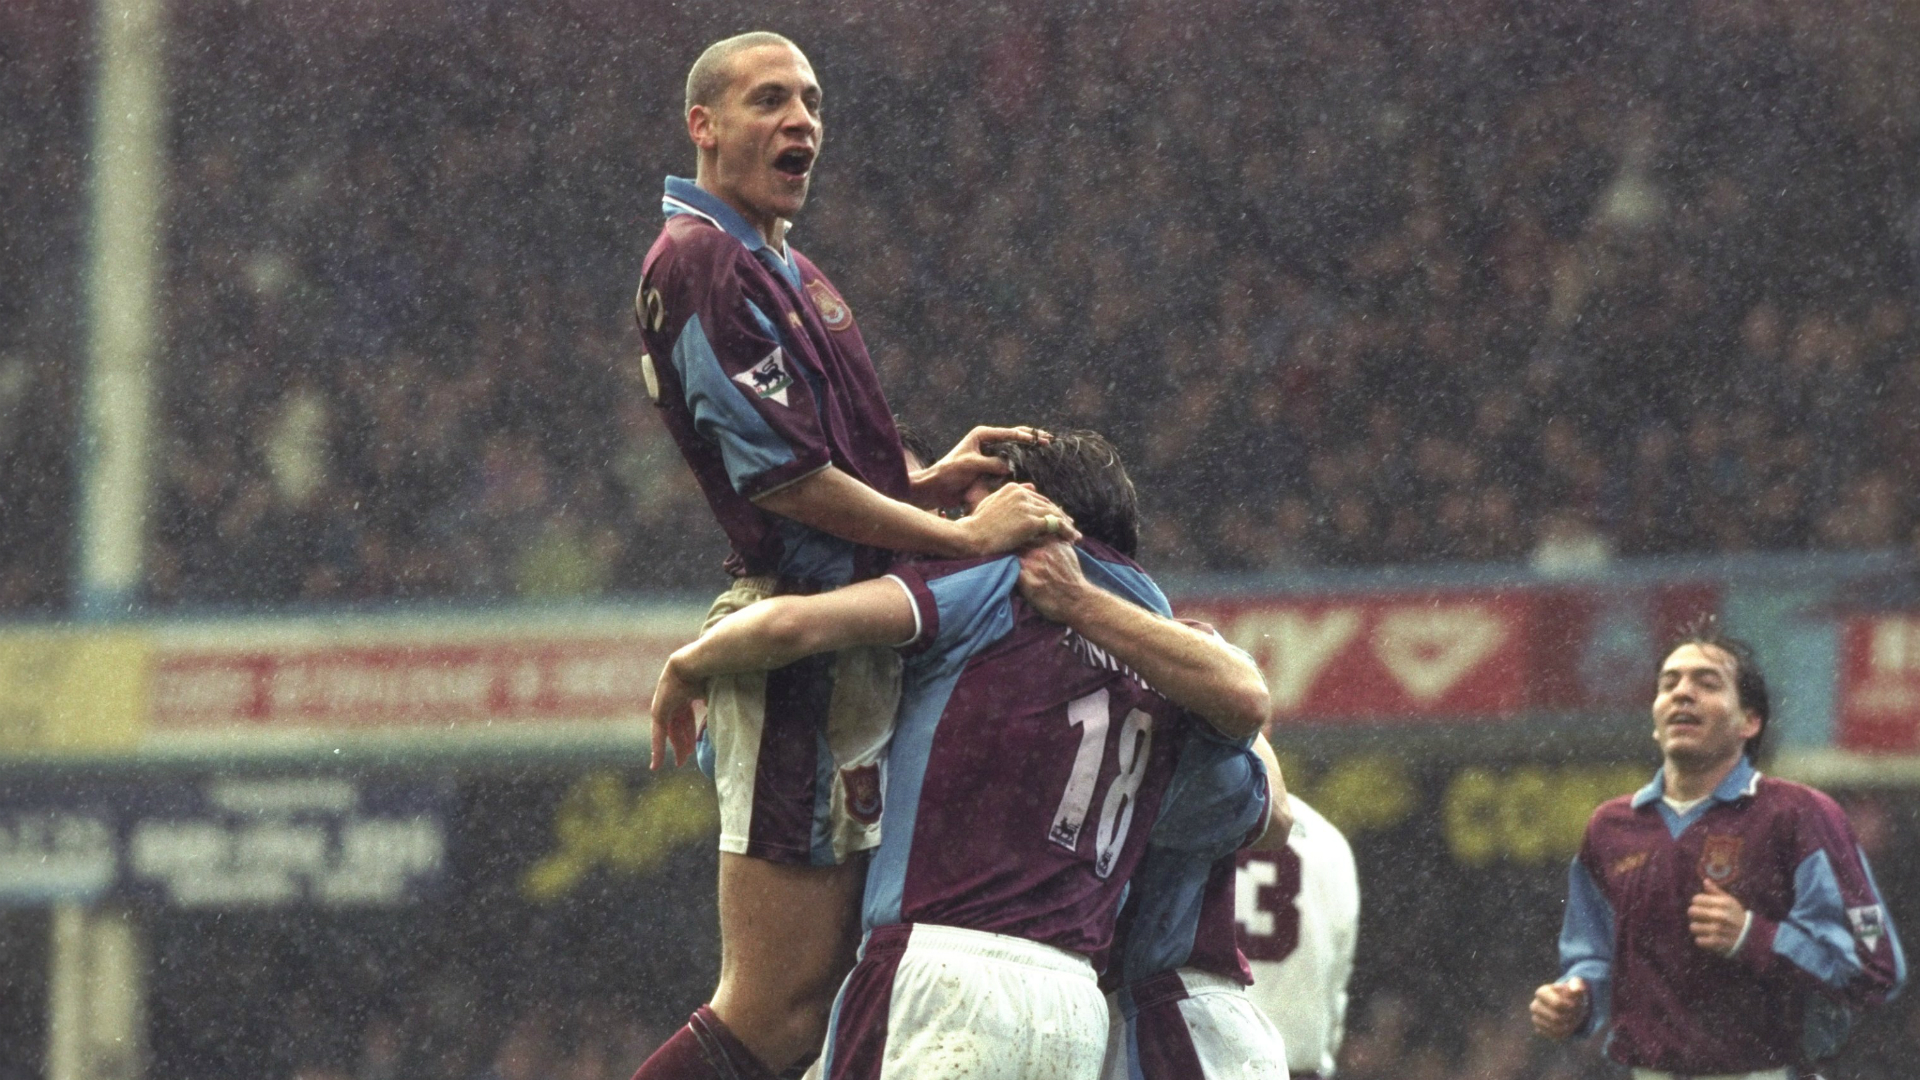 http://images.performgroup.com/di/library/goal_uk/97/bf/rio-ferdinand-west-ham-1998_1t3xle0qmngwc1nq7os79gyh6l.jpg?t=-1524775675w=800h=600